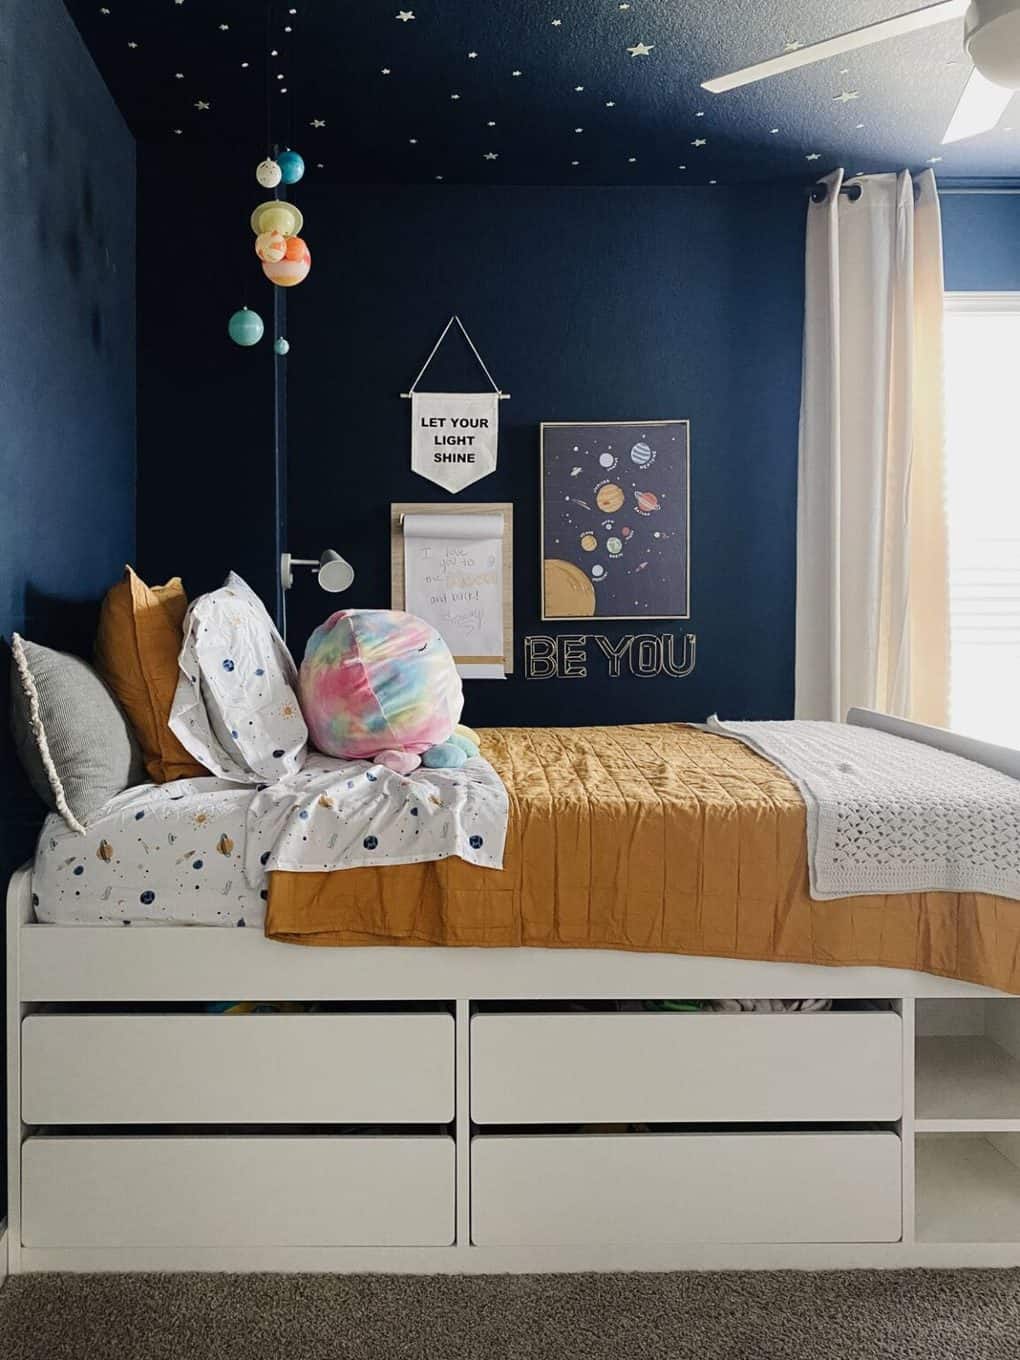 space themed kids bedroom with yellow bedding